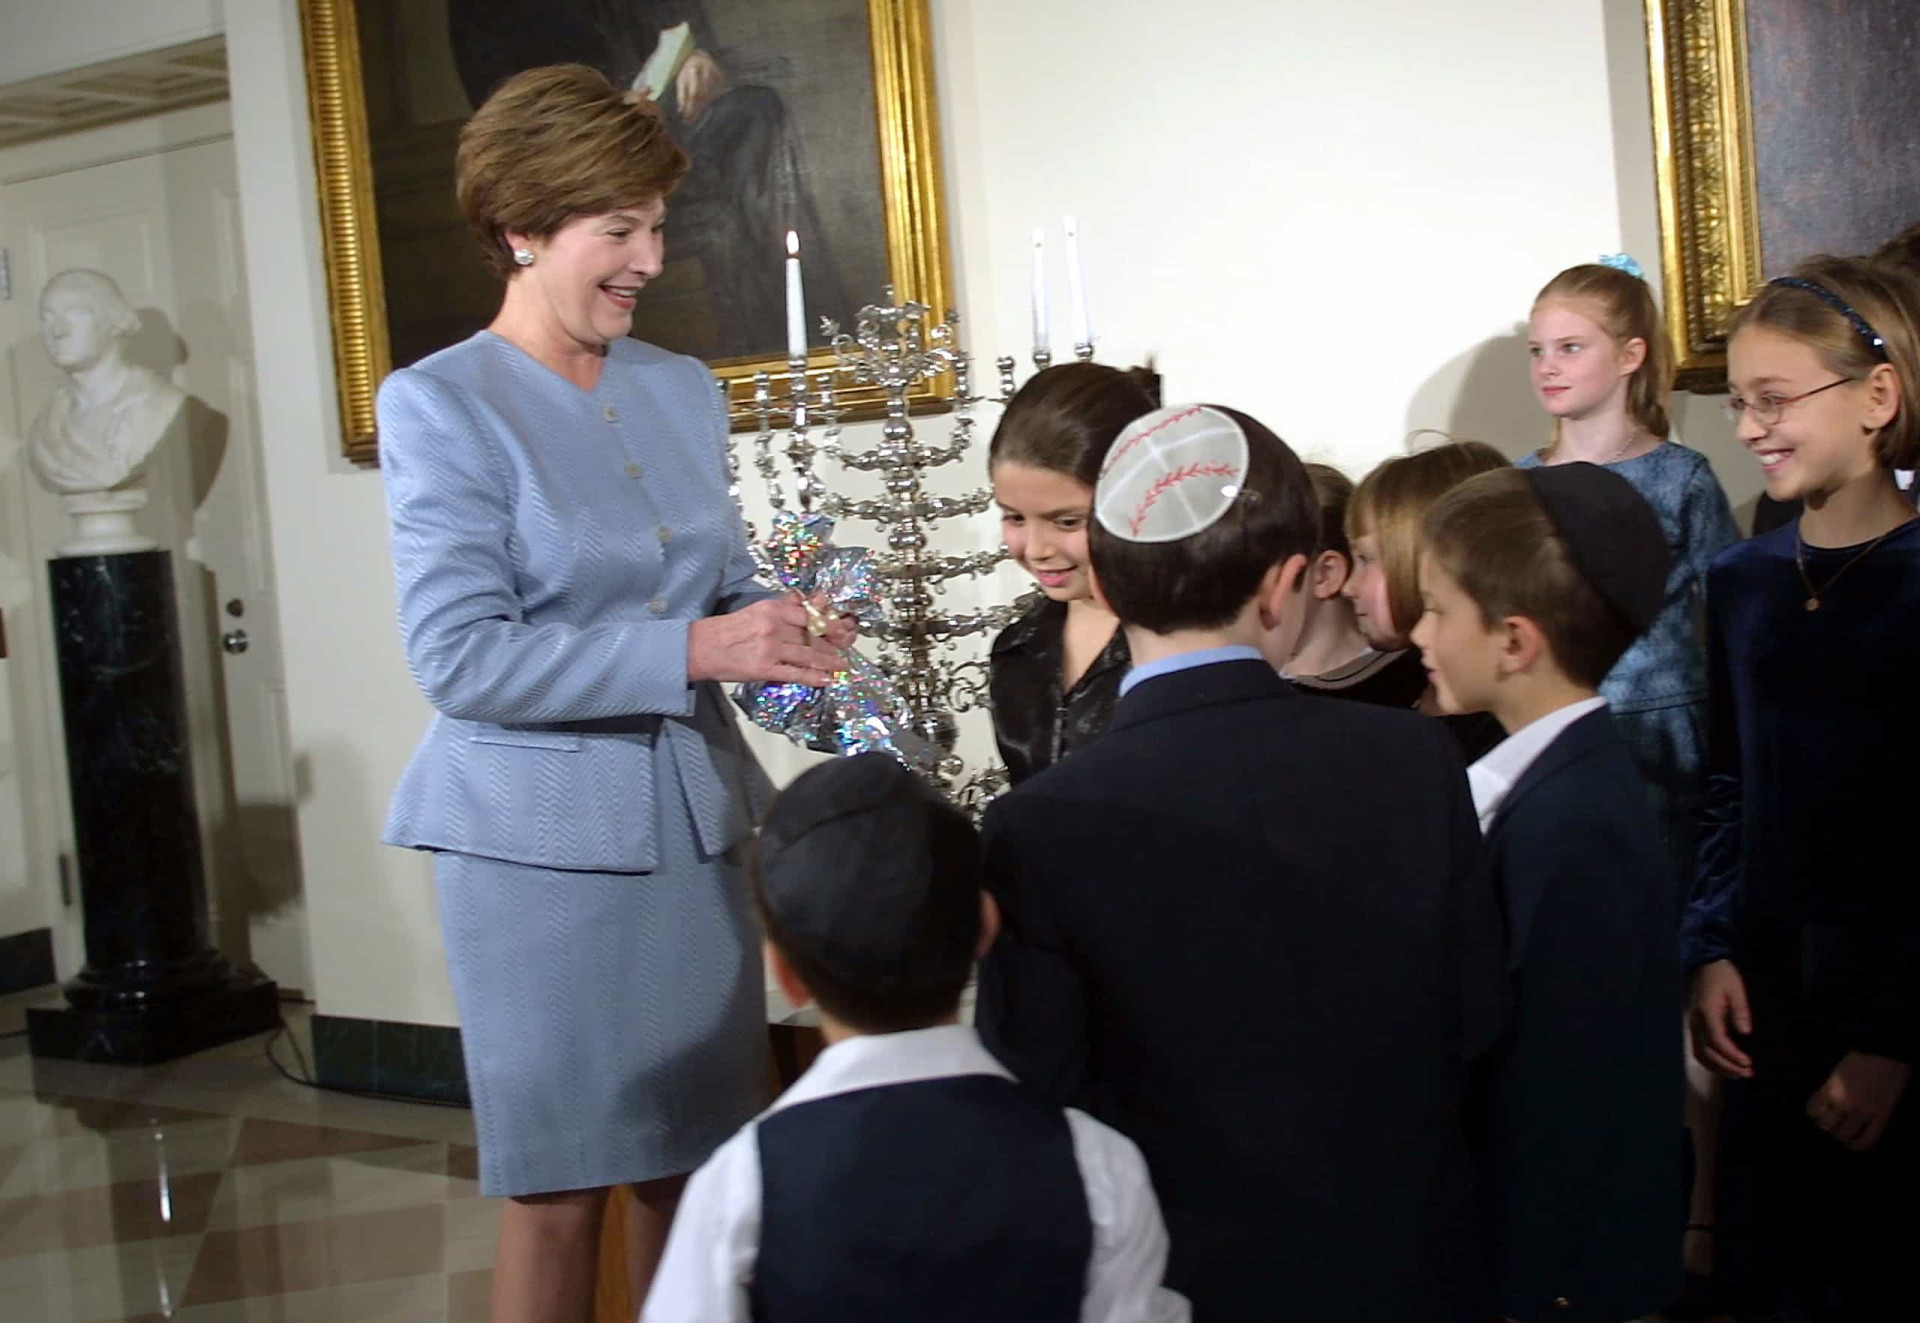 <p>President George W. Bush and First Lady Laura Bush hosted the first official White House Jewish celebration.</p><p><a href="https://www.msn.com/en-us/community/channel/vid-7xx8mnucu55yw63we9va2gwr7uihbxwc68fxqp25x6tg4ftibpra?cvid=94631541bc0f4f89bfd59158d696ad7e">Follow us and access great exclusive content every day</a></p>